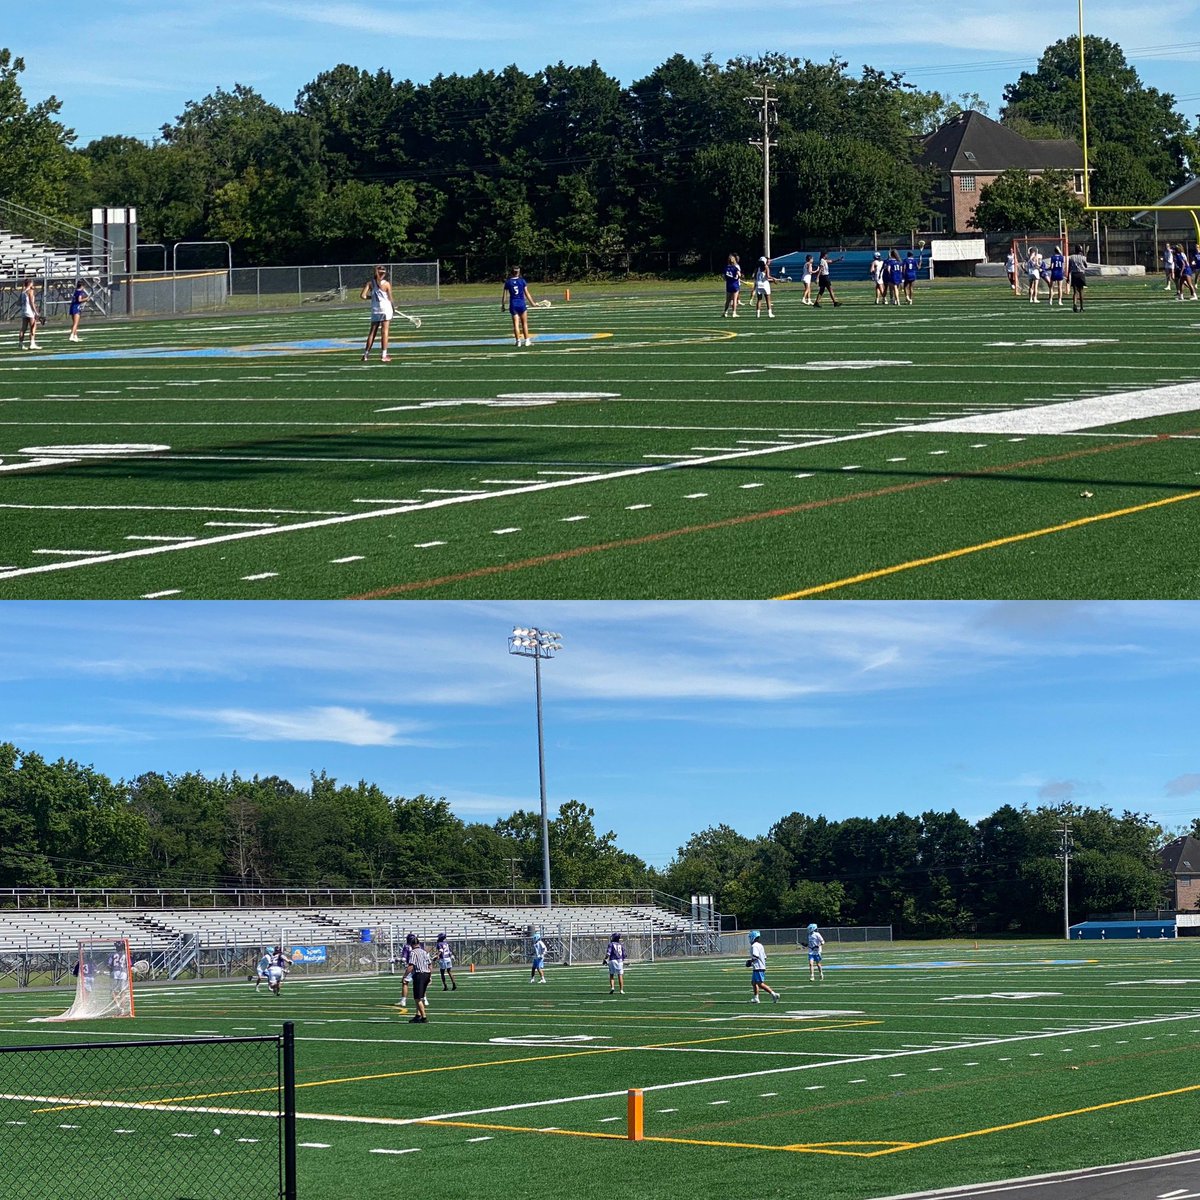 A great day for FC athletics. In their inaugural seasons, both lacrosse teams hosted a state quarterfinal game. #PatriotPride #WeRFC